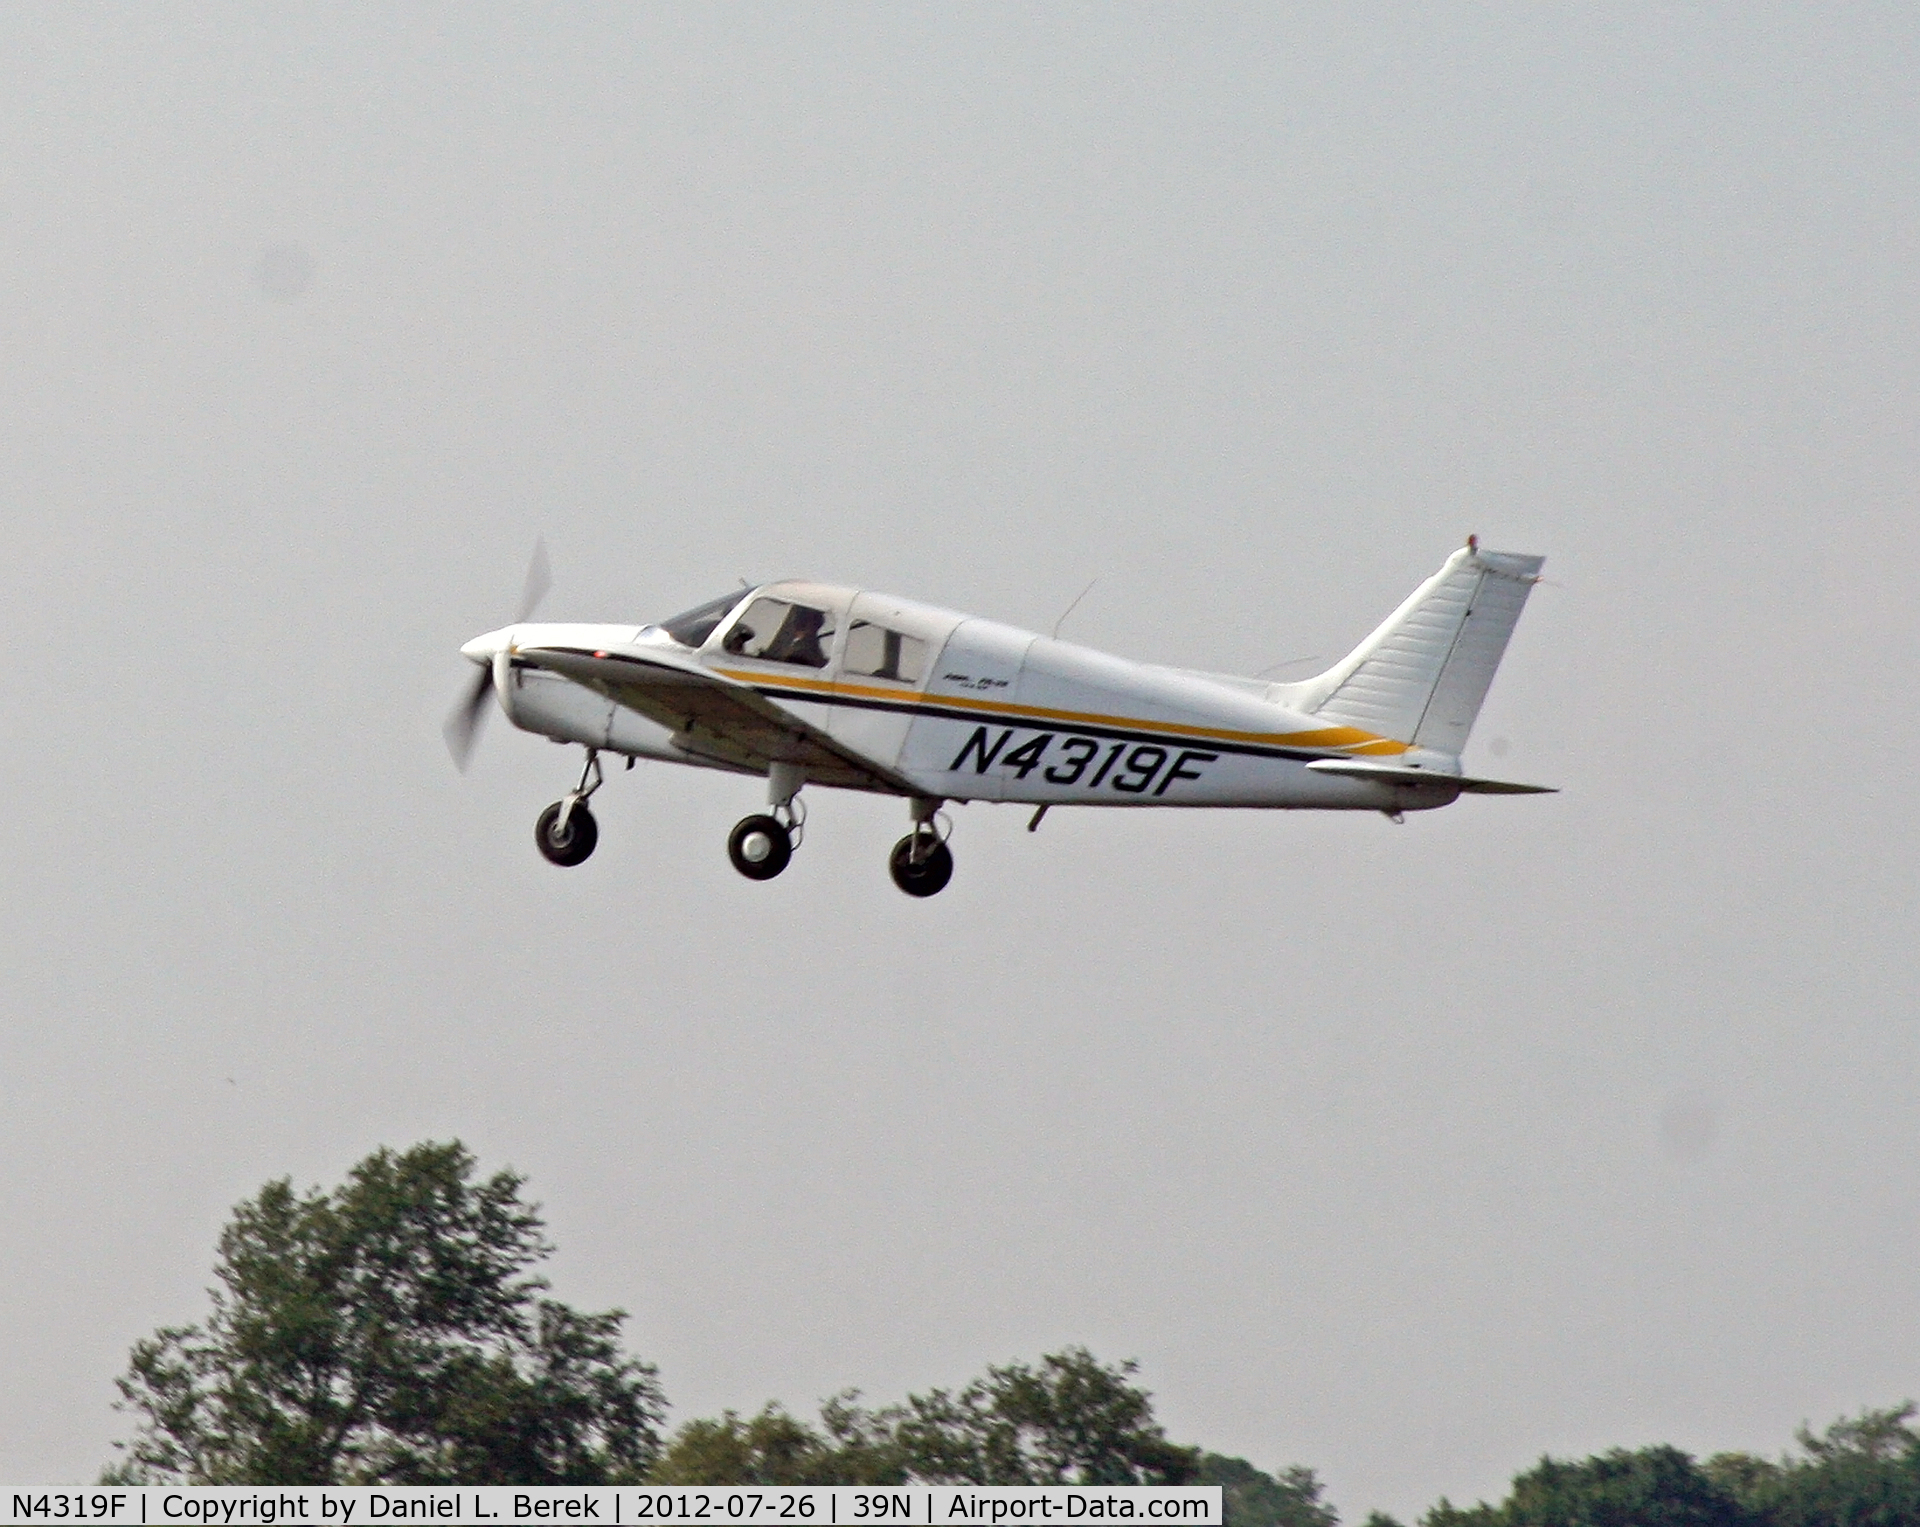 N4319F, 1976 Piper PA-28-140 C/N 28-7725007, A Piper Cherokee launches itself at Princeton Airport.